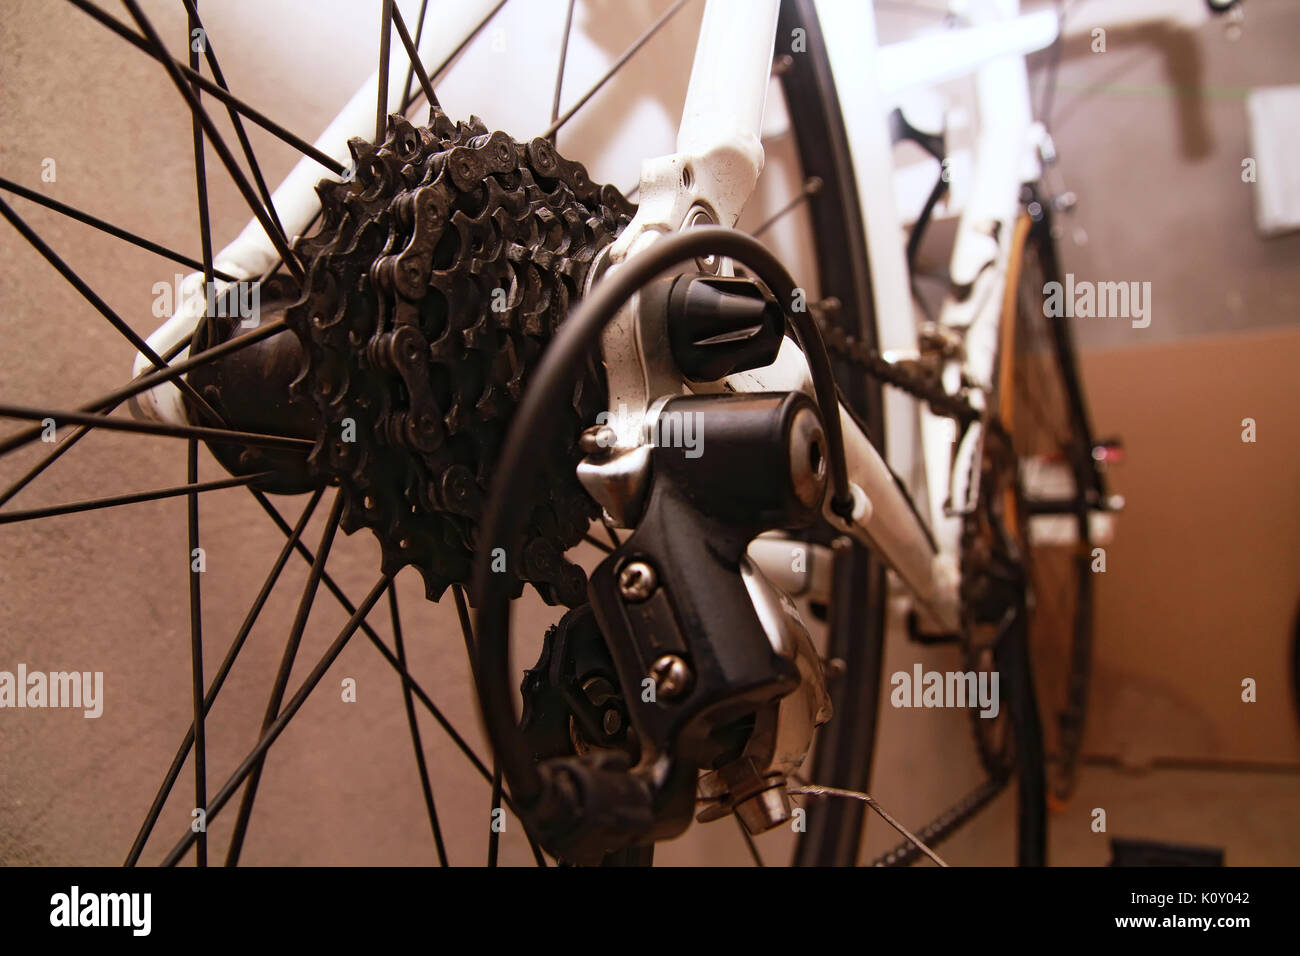 Part of road bicycle. Sports parts, lightweight, fast and durable. Stock Photo